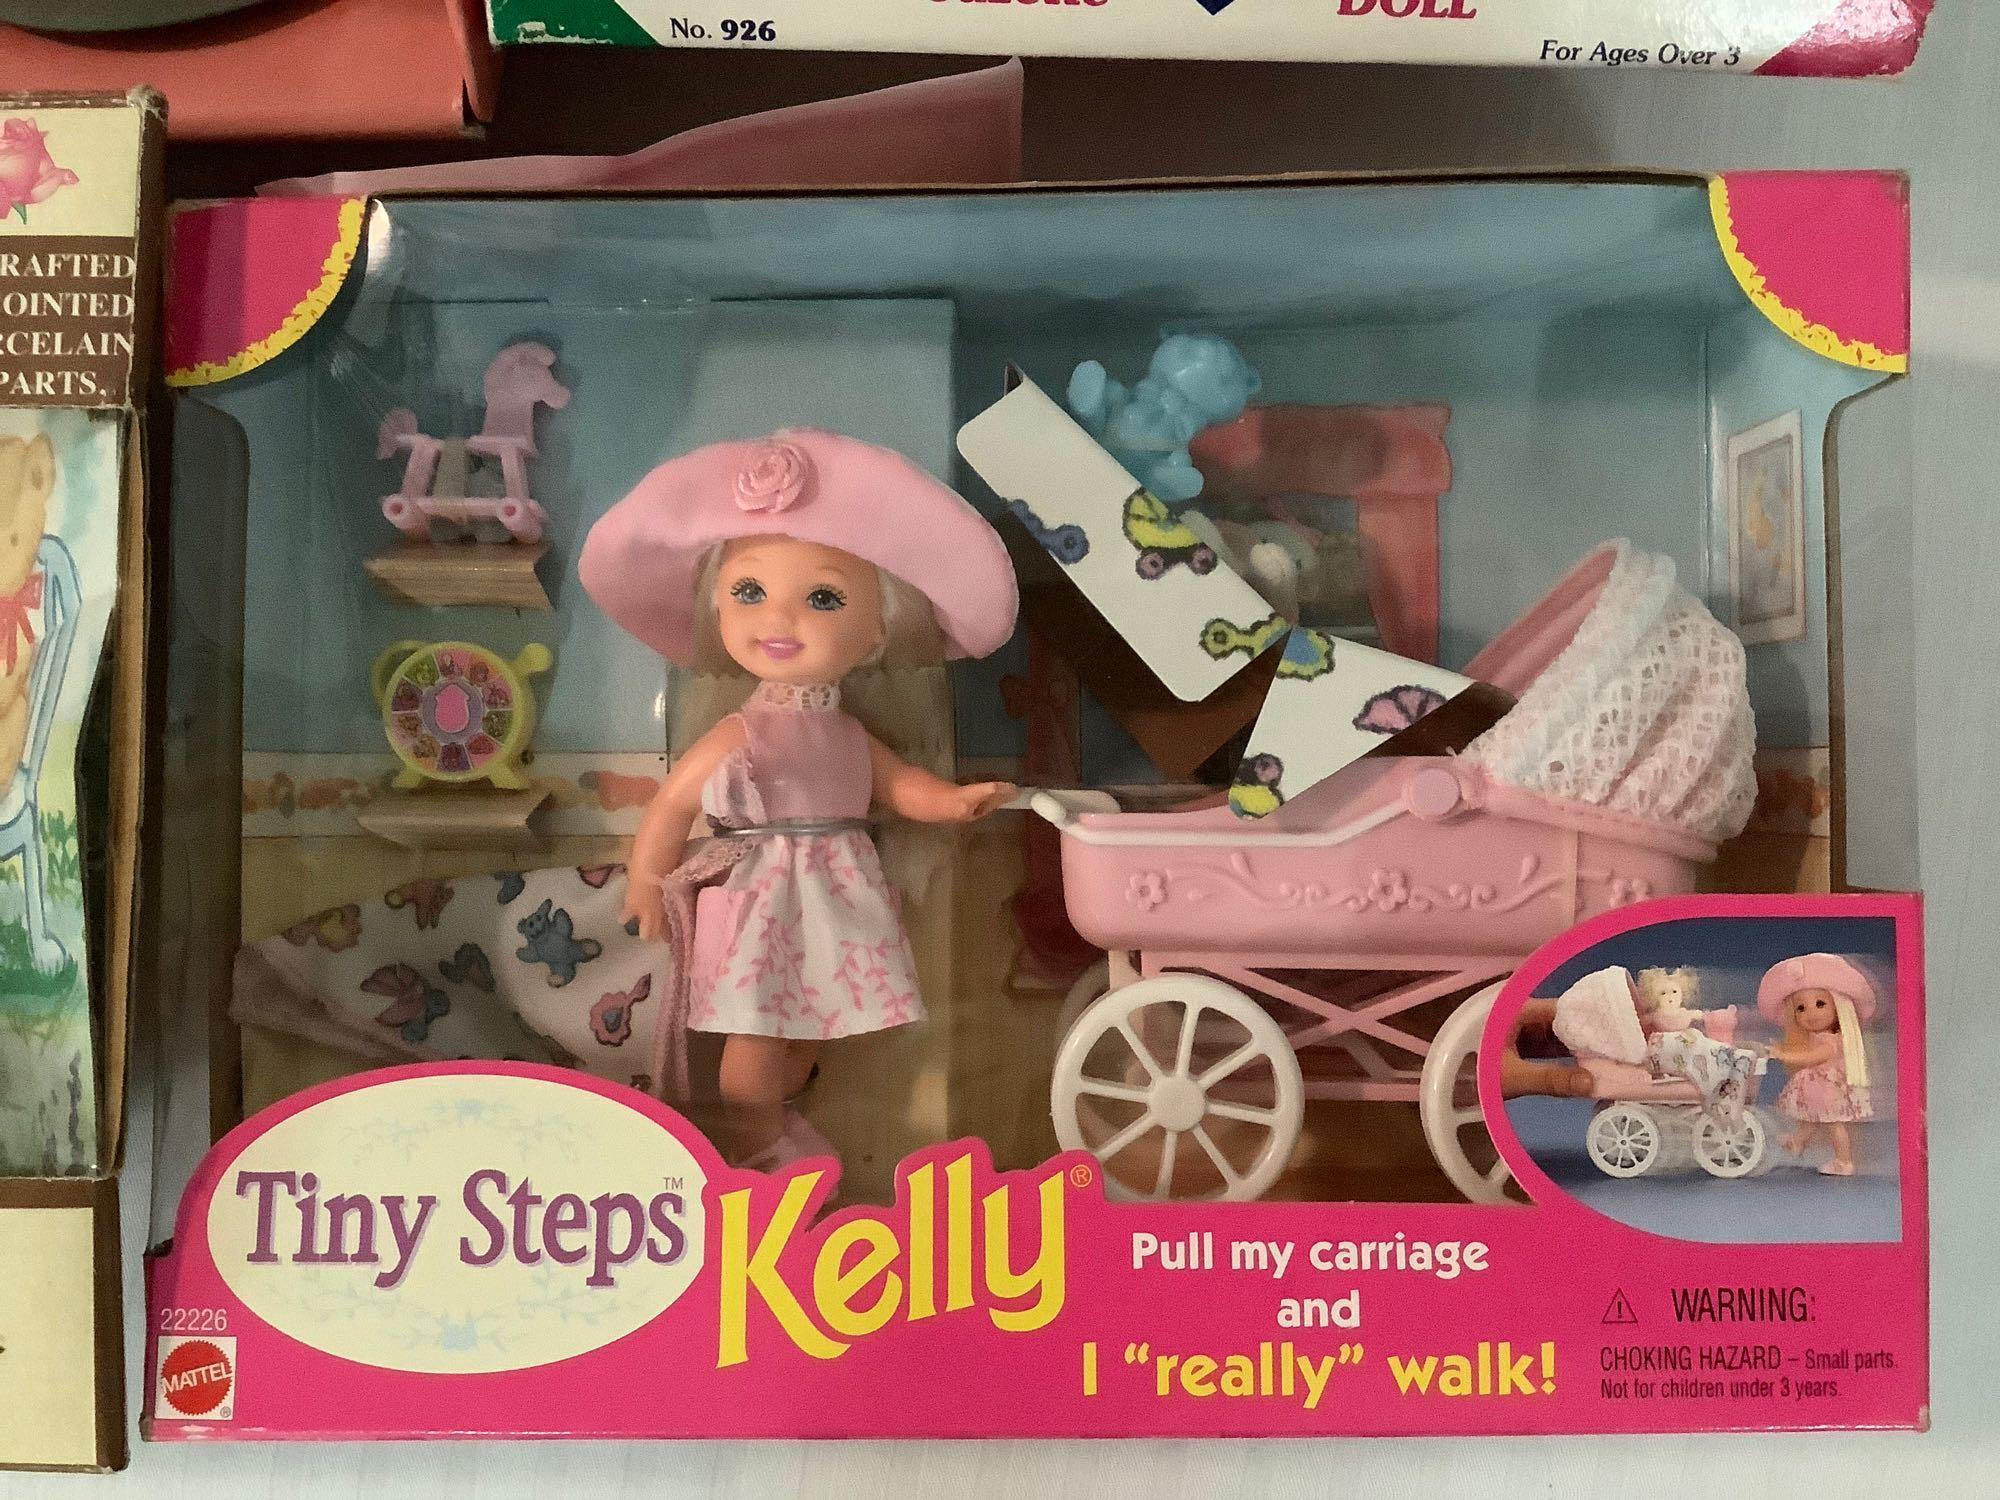 5x dolls in original boxes; Bradley Collector Porcelain, Tiny Steps Kelly, One World Kids, The